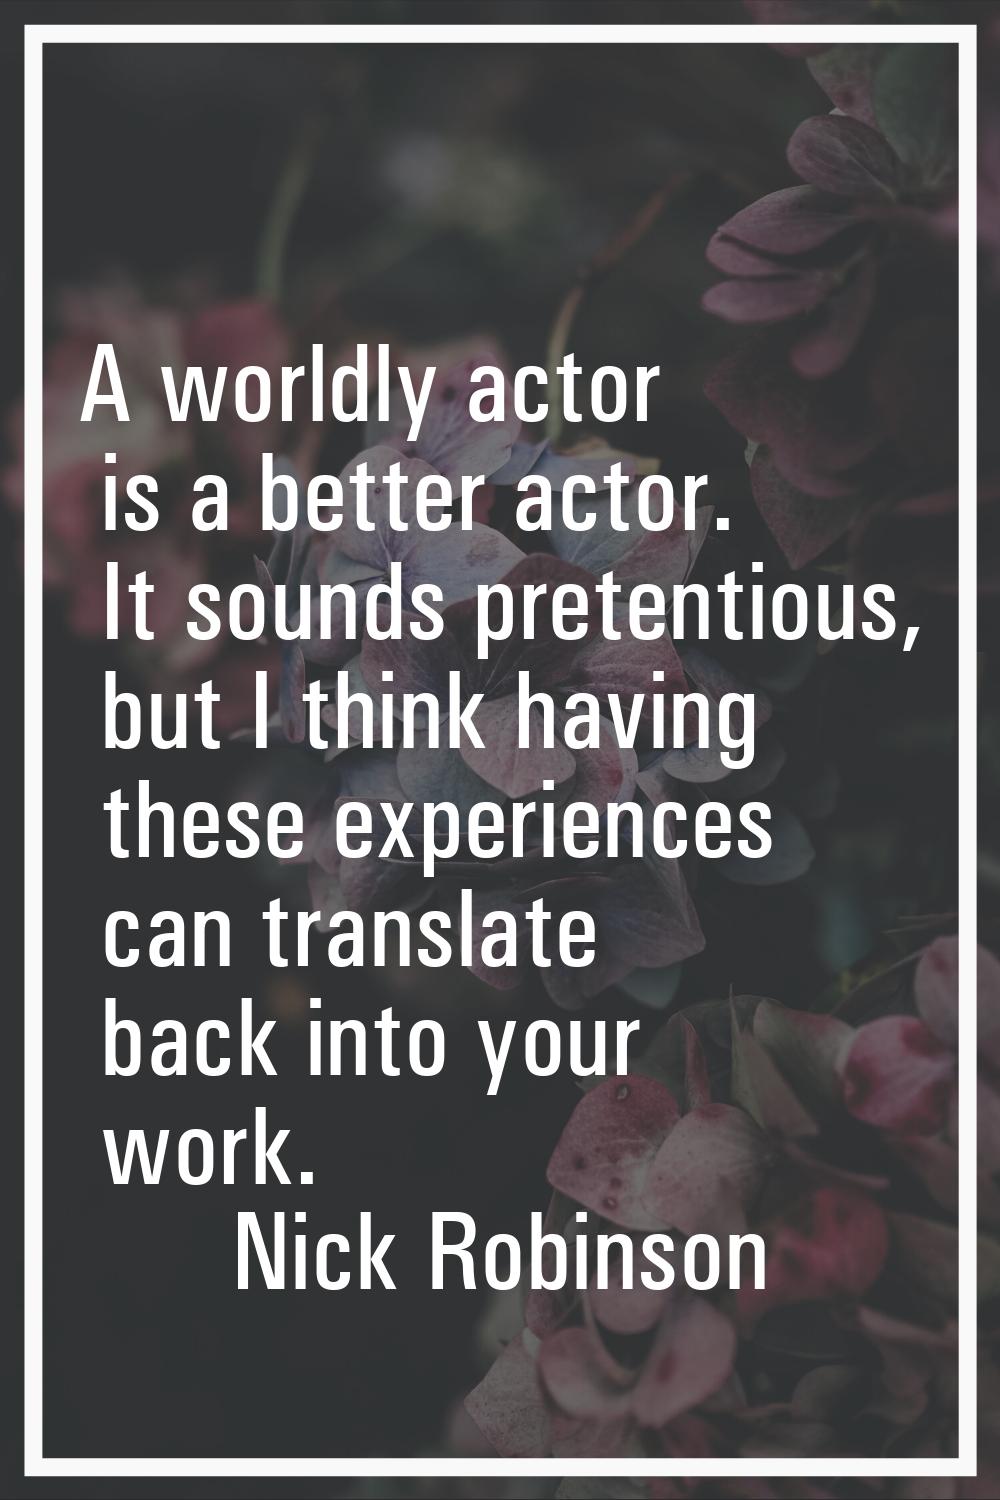 A worldly actor is a better actor. It sounds pretentious, but I think having these experiences can 